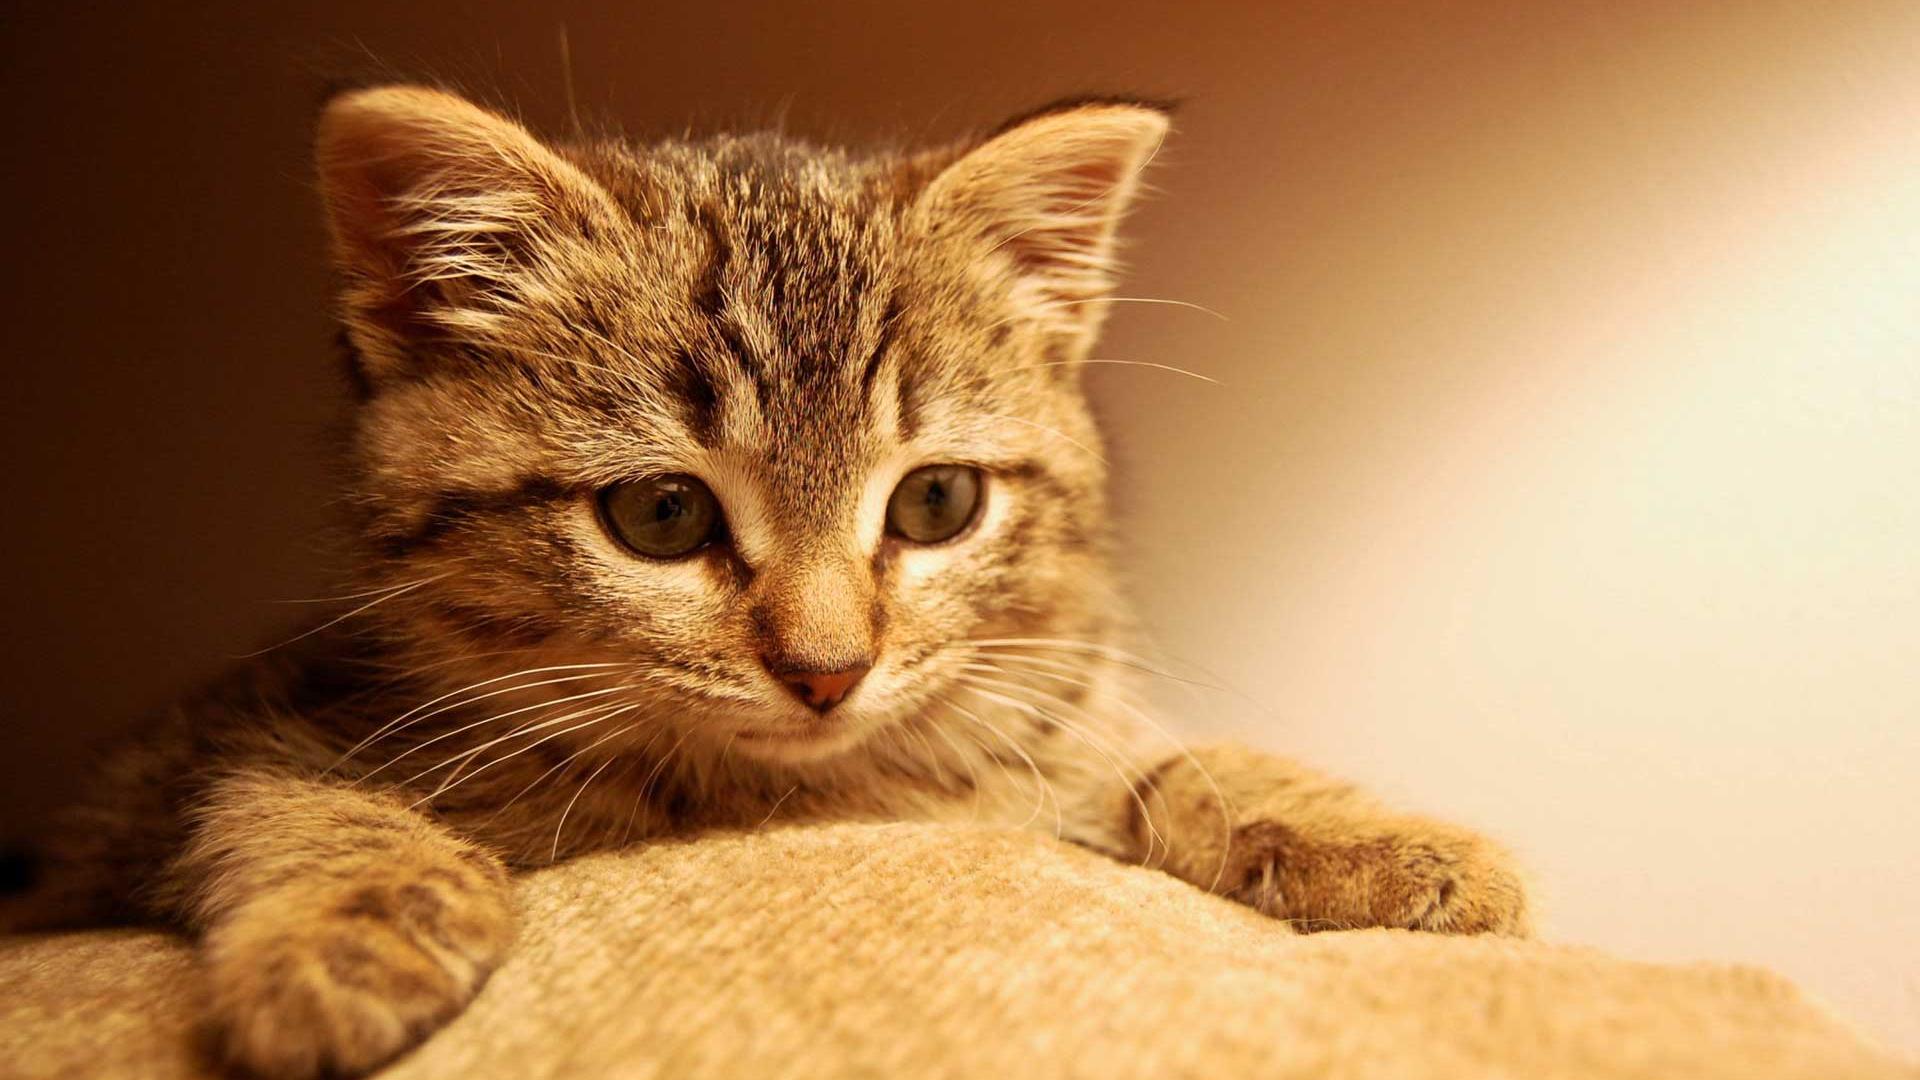 Cute Background Background Wallpaper Kitty Cat Image